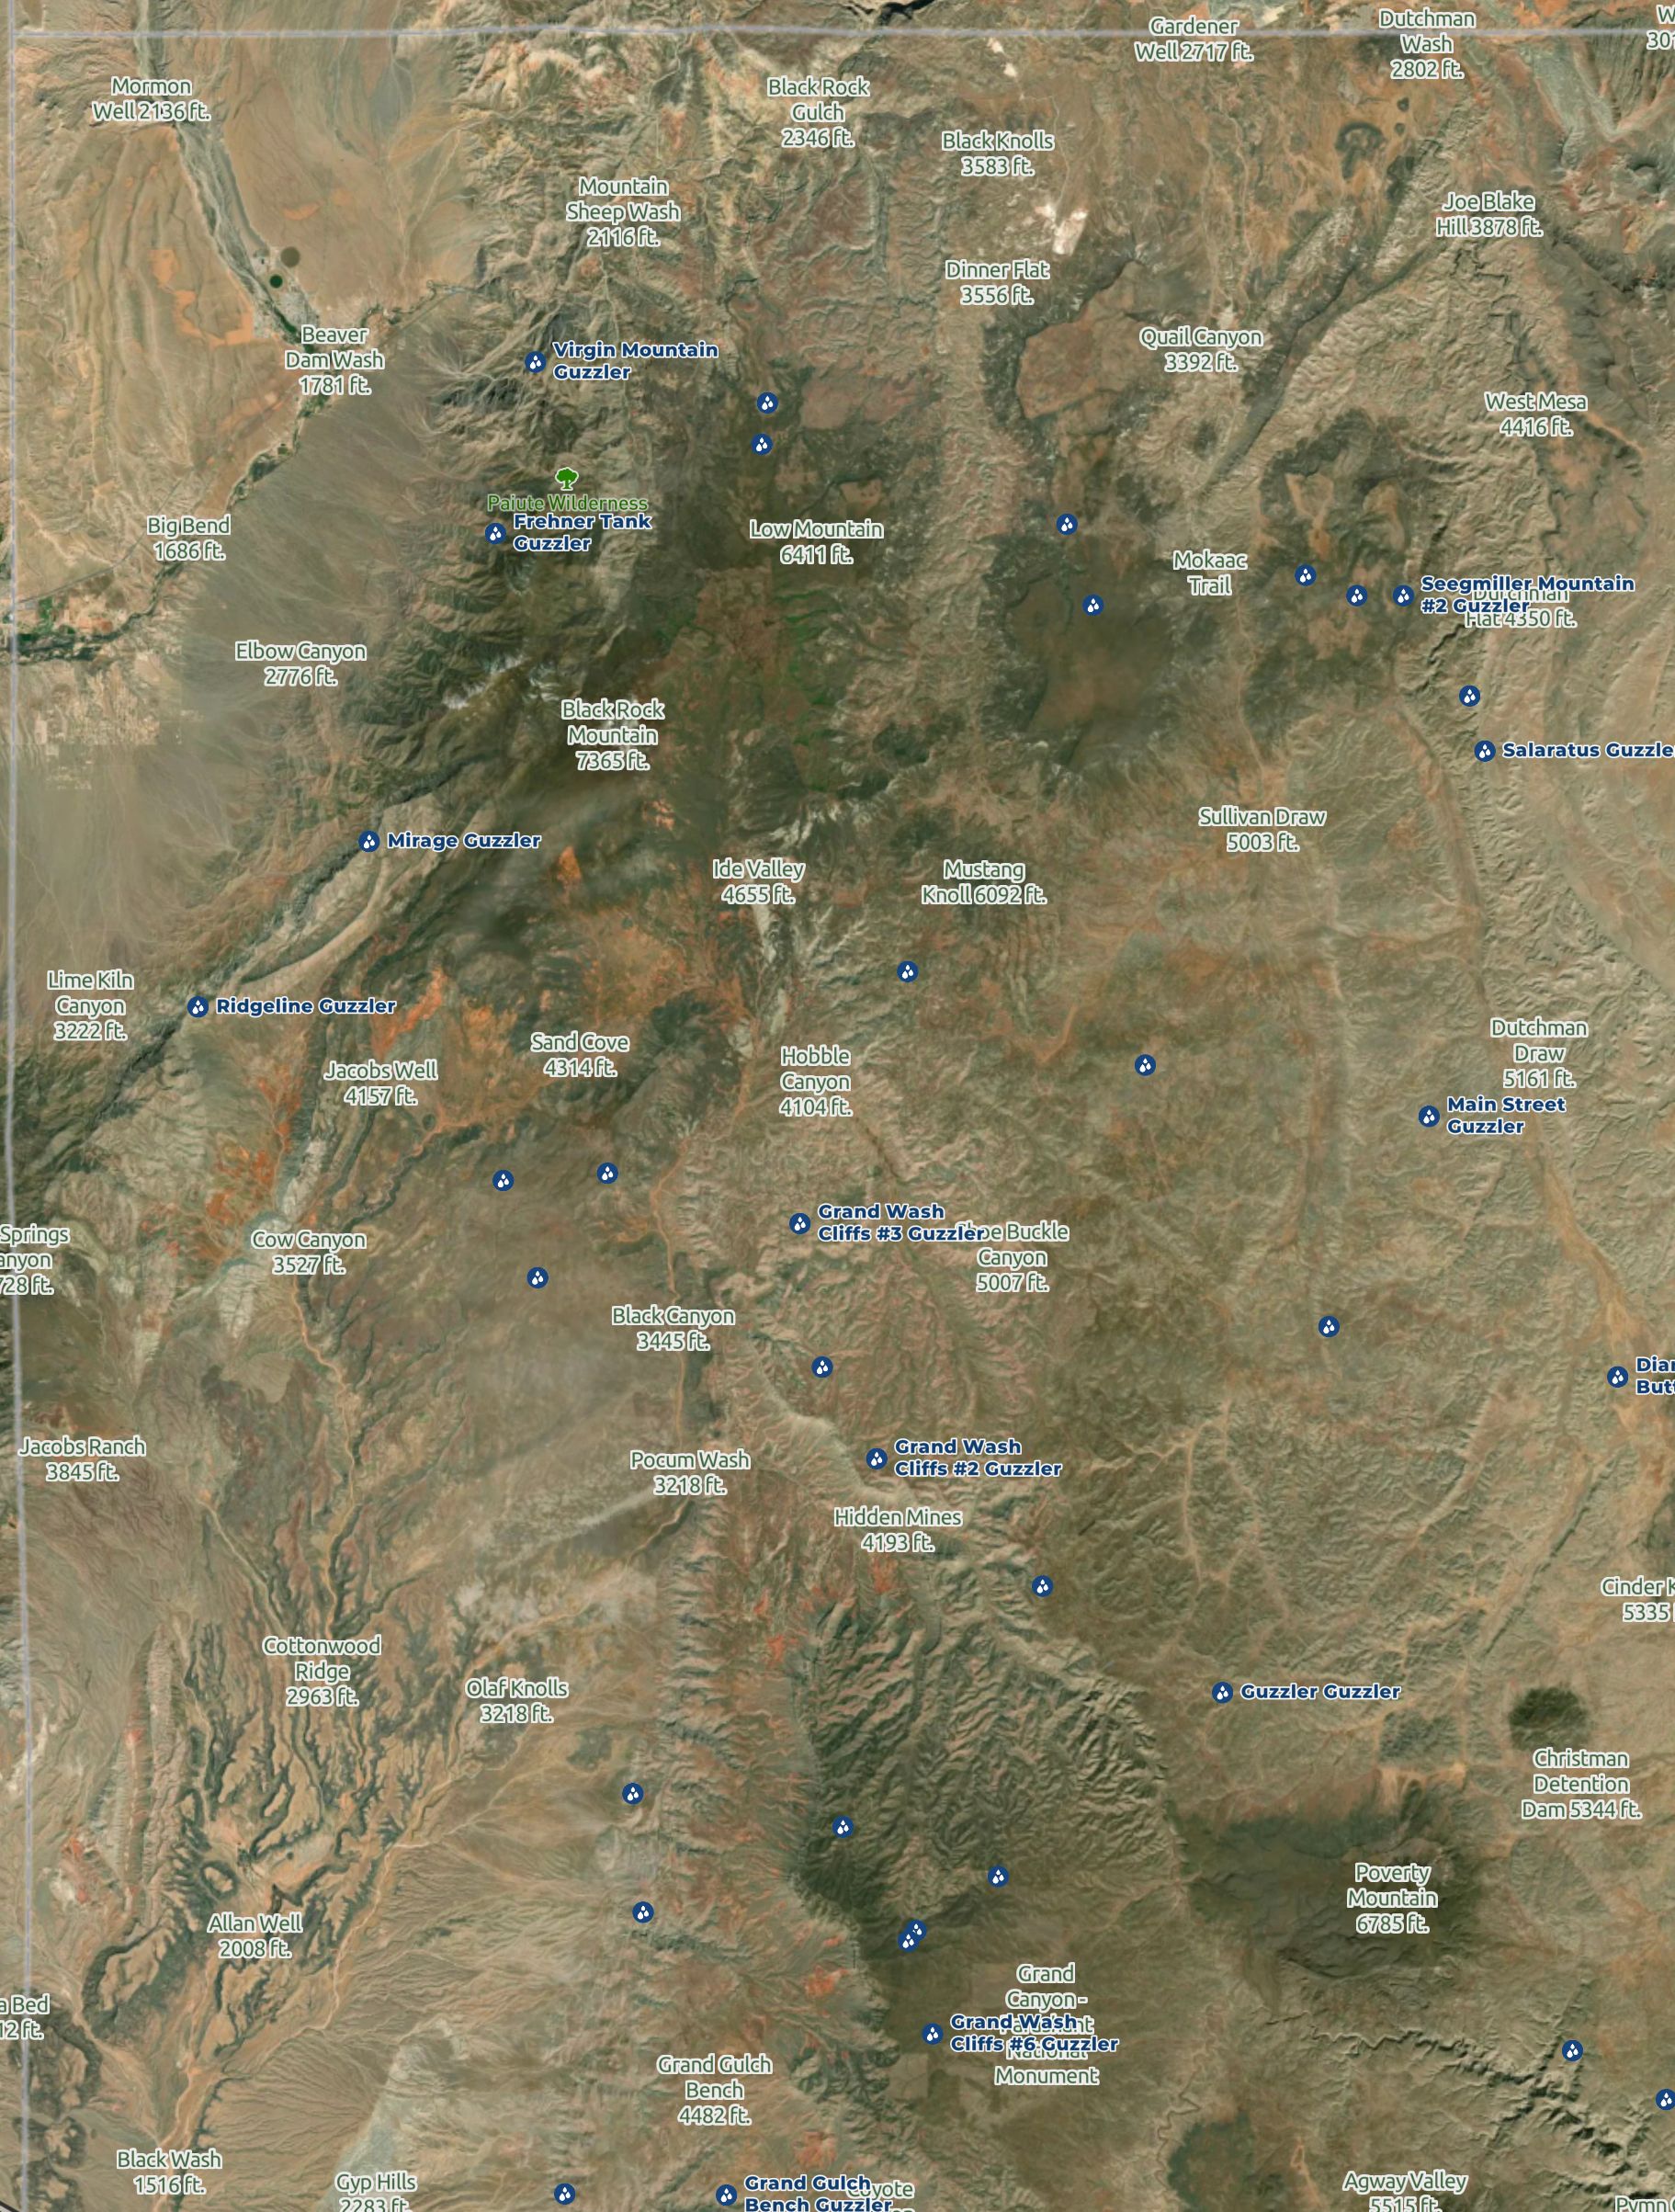 Satellite Map of the The Strip region in northern Arizona - Scout To Hunt App